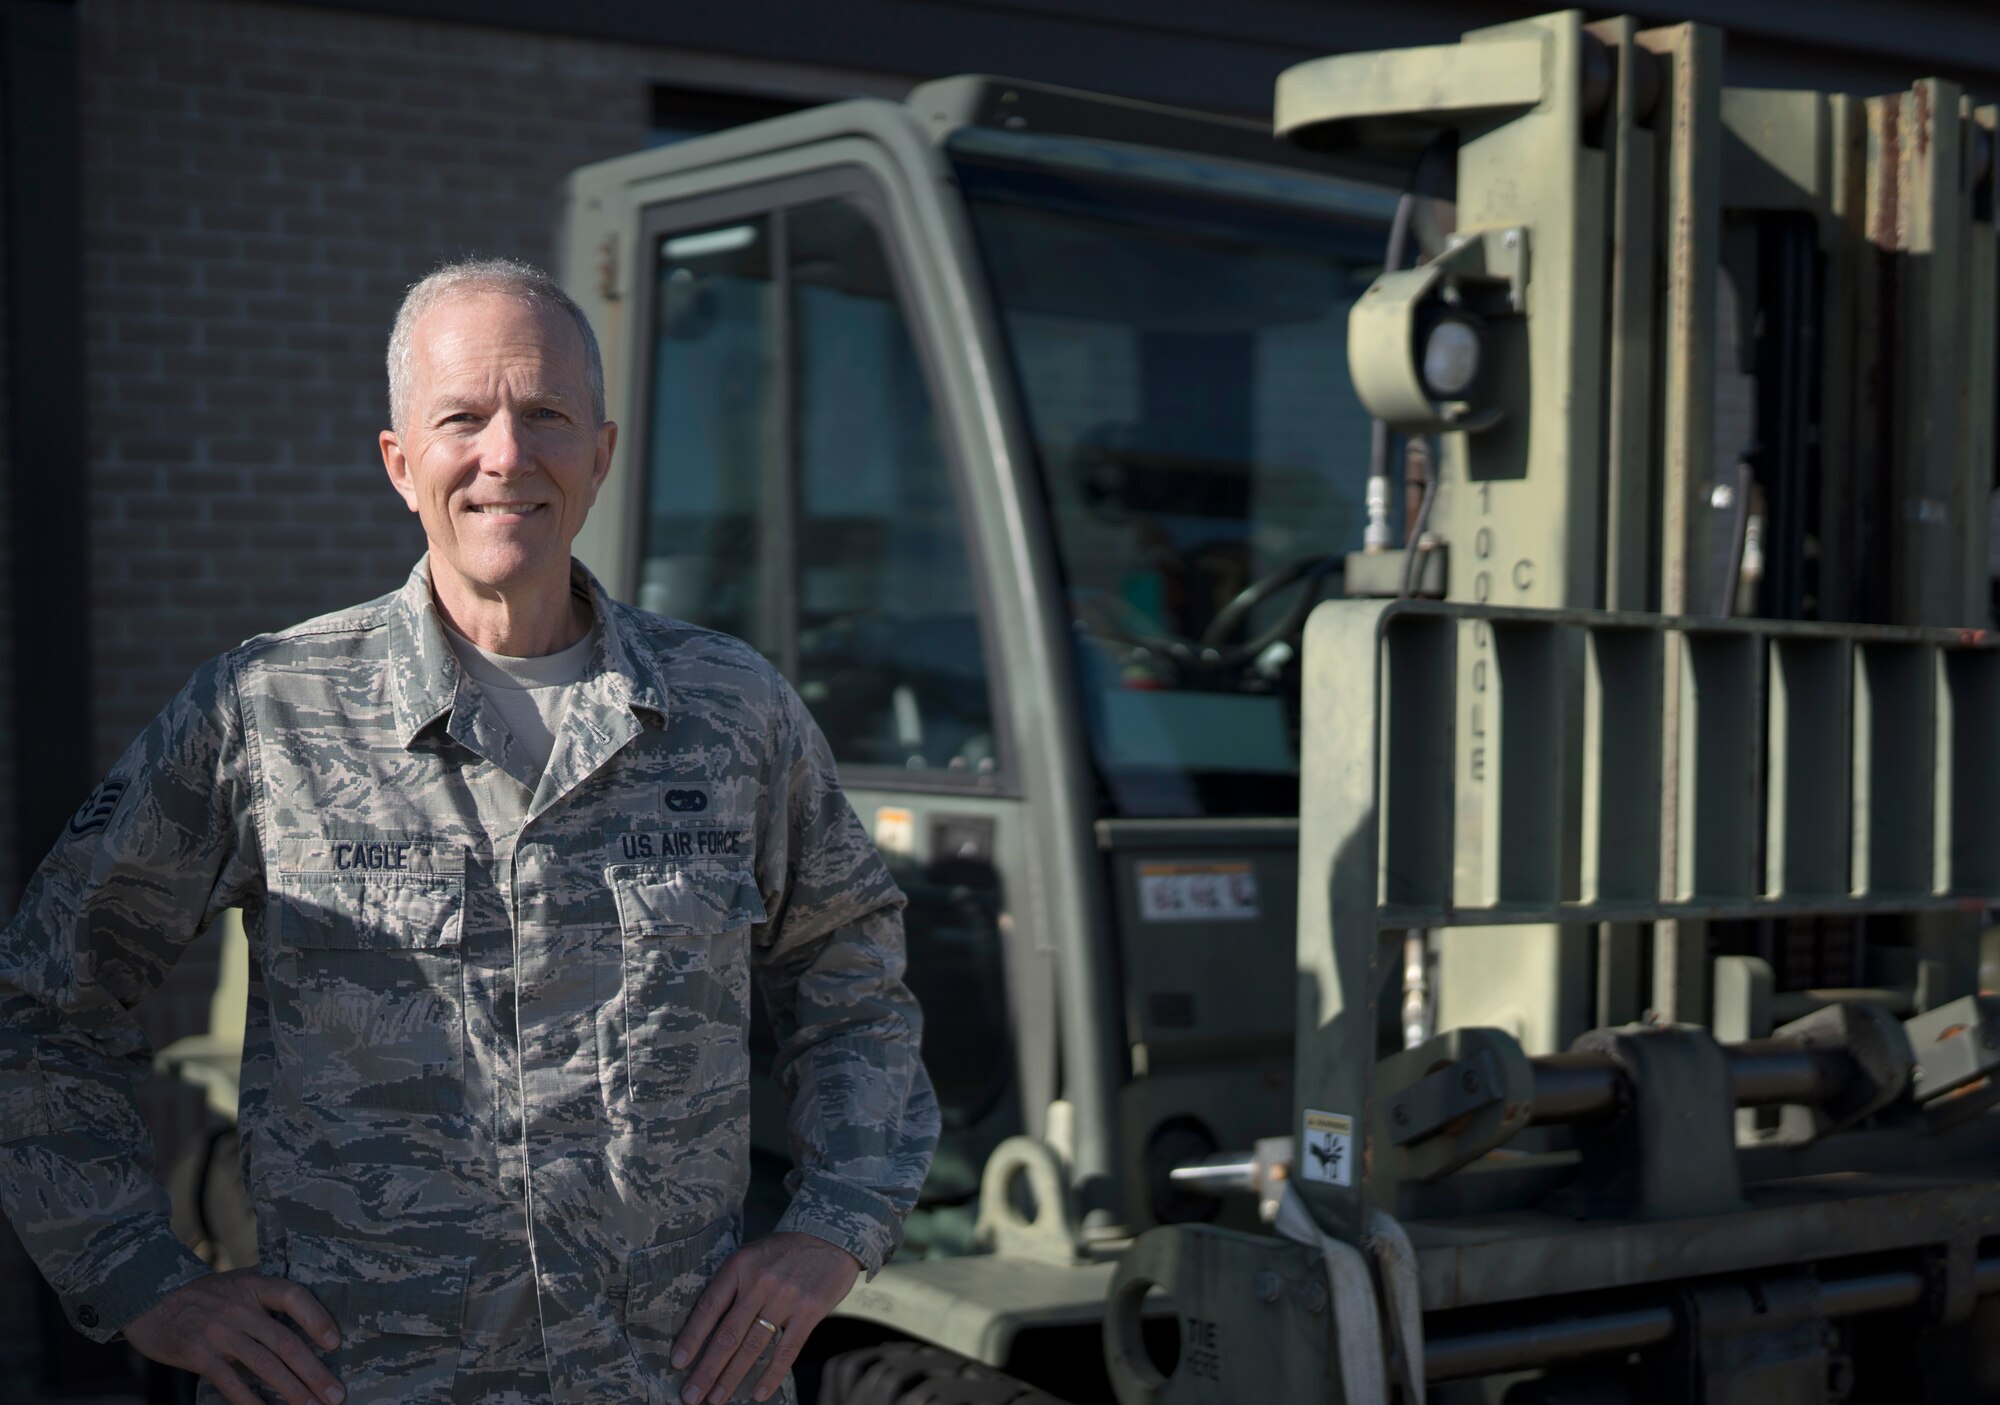 Staff Sgt. Jim Cagle, air terminal operations center controller in the 41st Aerial Port Squadron at Keesler Air Force Base, Miss., poses for a photo in front of a forklift at Keesler Feb. 8, 2020. Prior to his five years with the 403rd Wing, Cagle served as a weapons system officer and fighter pilot in the Louisiana Air National Guard from 1980 to 1993. (U.S. Air Force photo by Senior Airman Kristen Pittman)